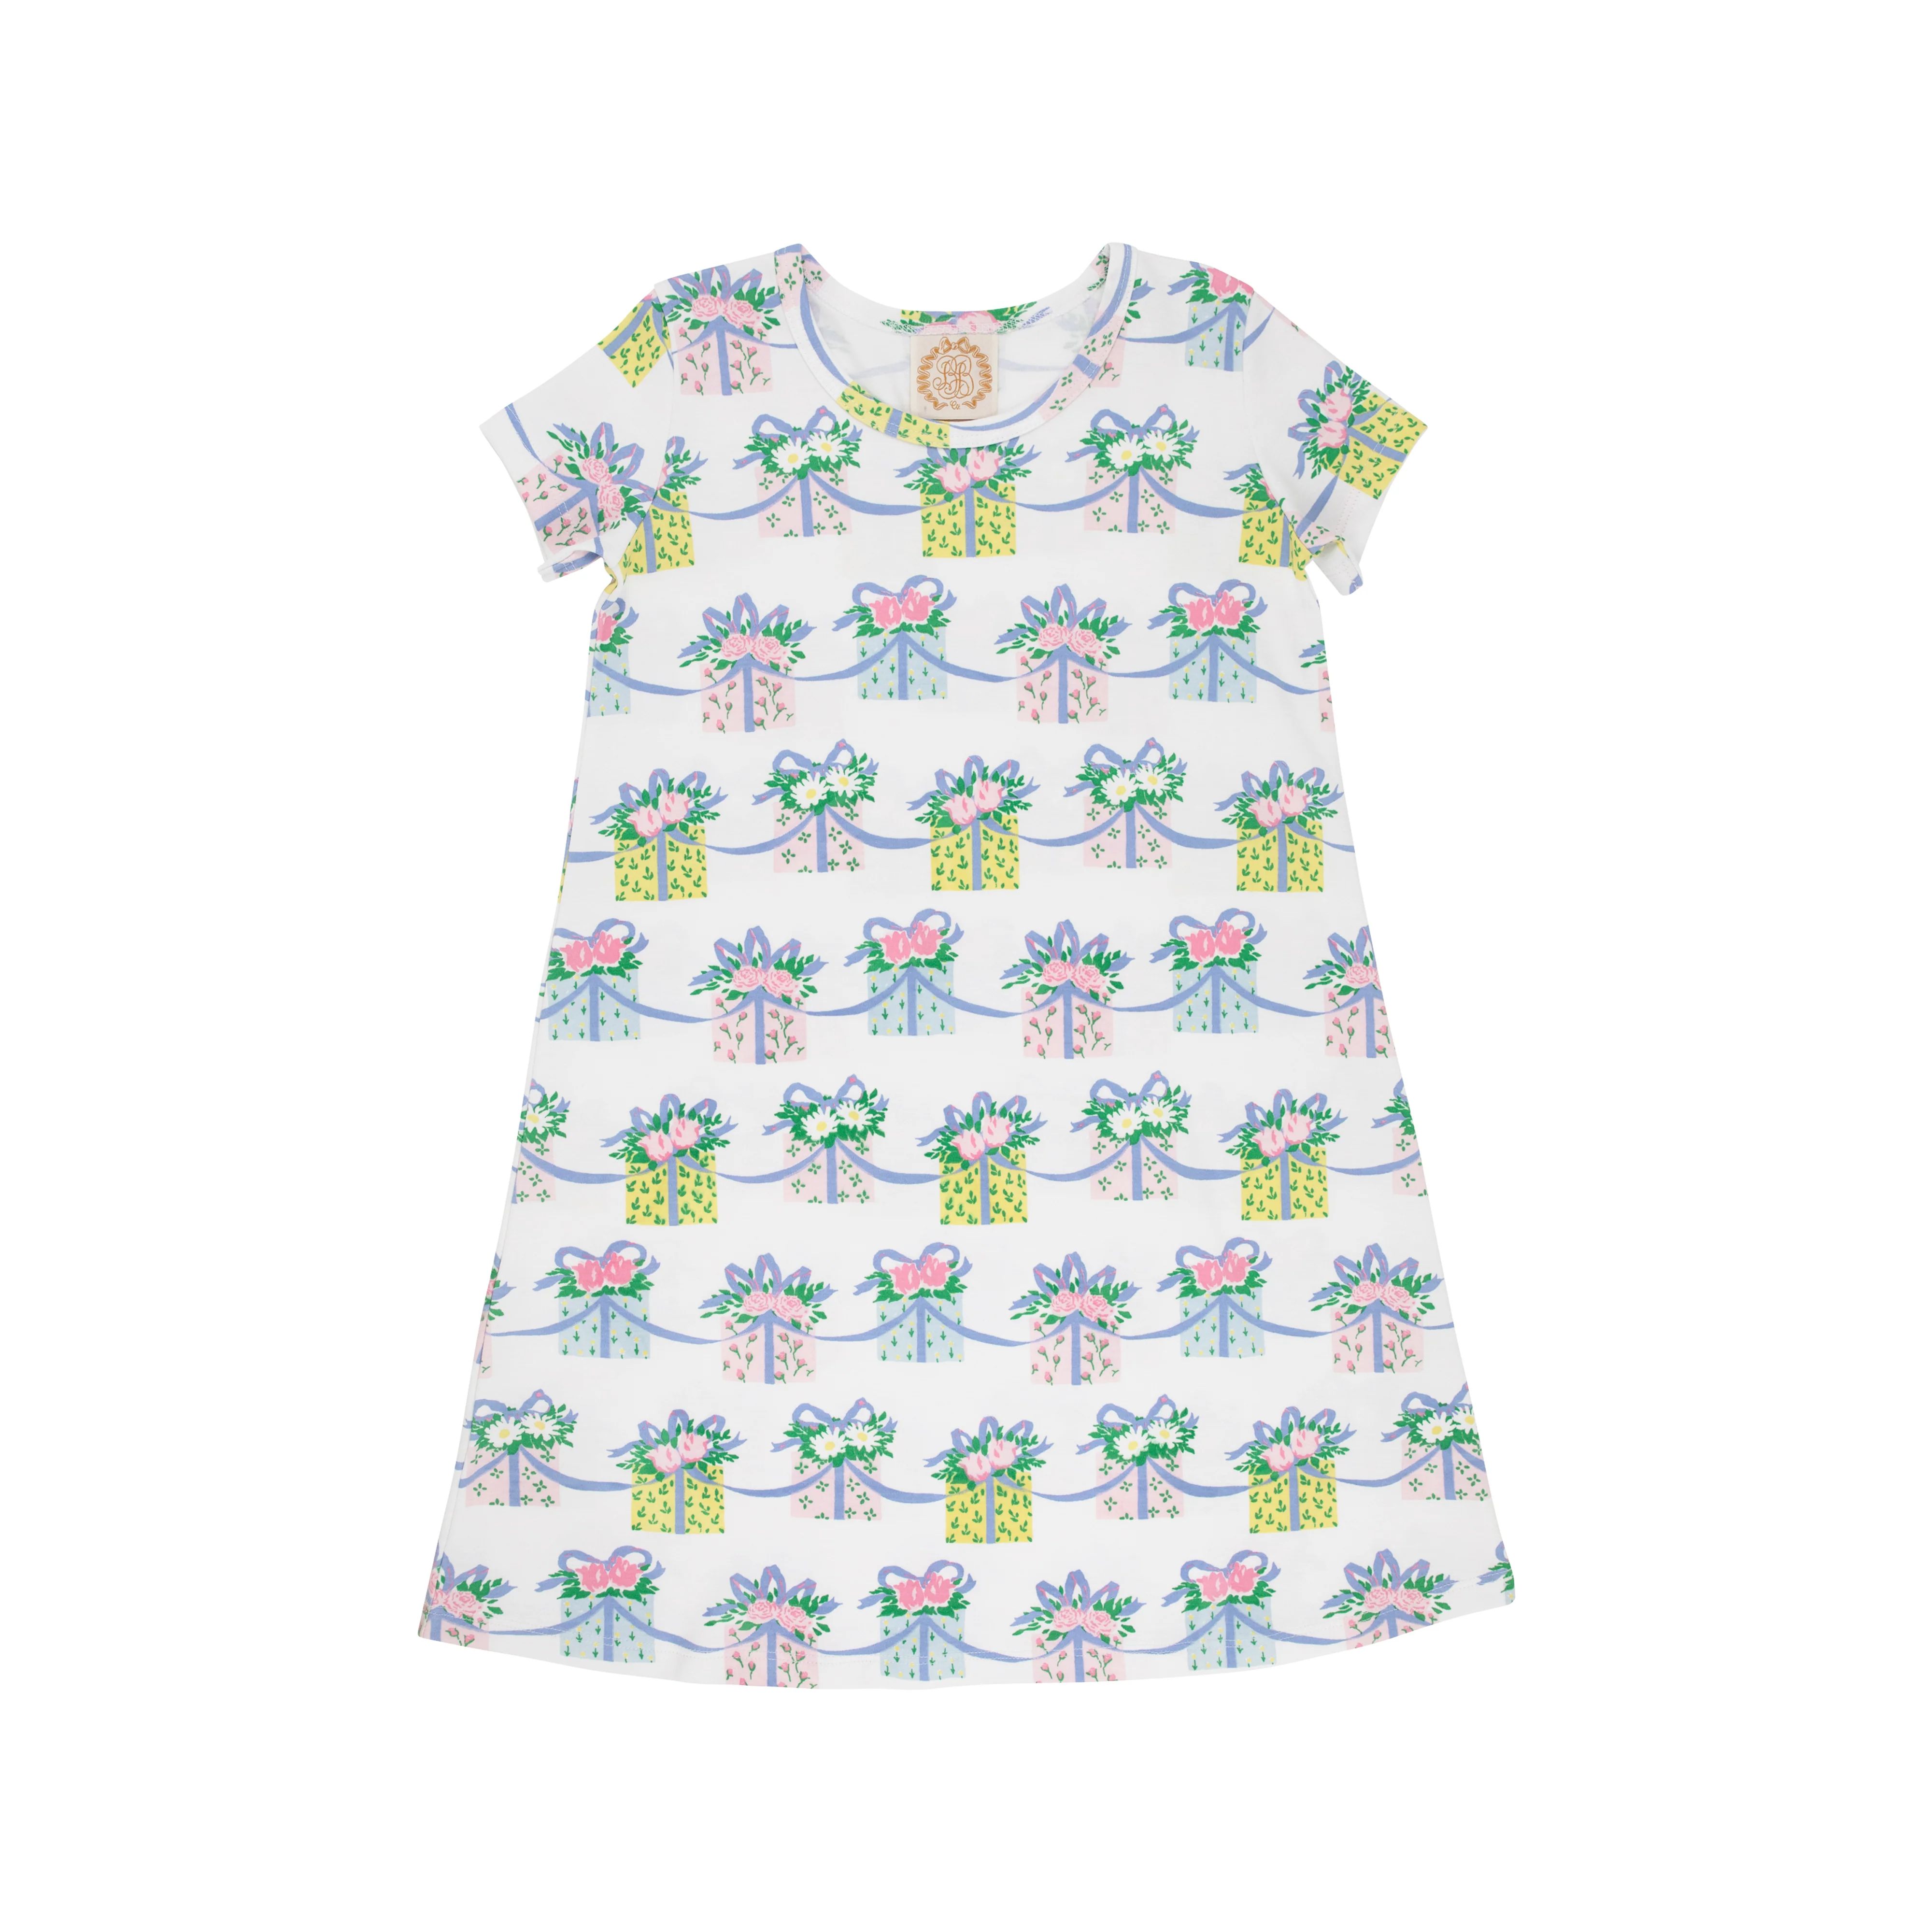 Polly Play Dress - Every Day is a Gift | The Beaufort Bonnet Company